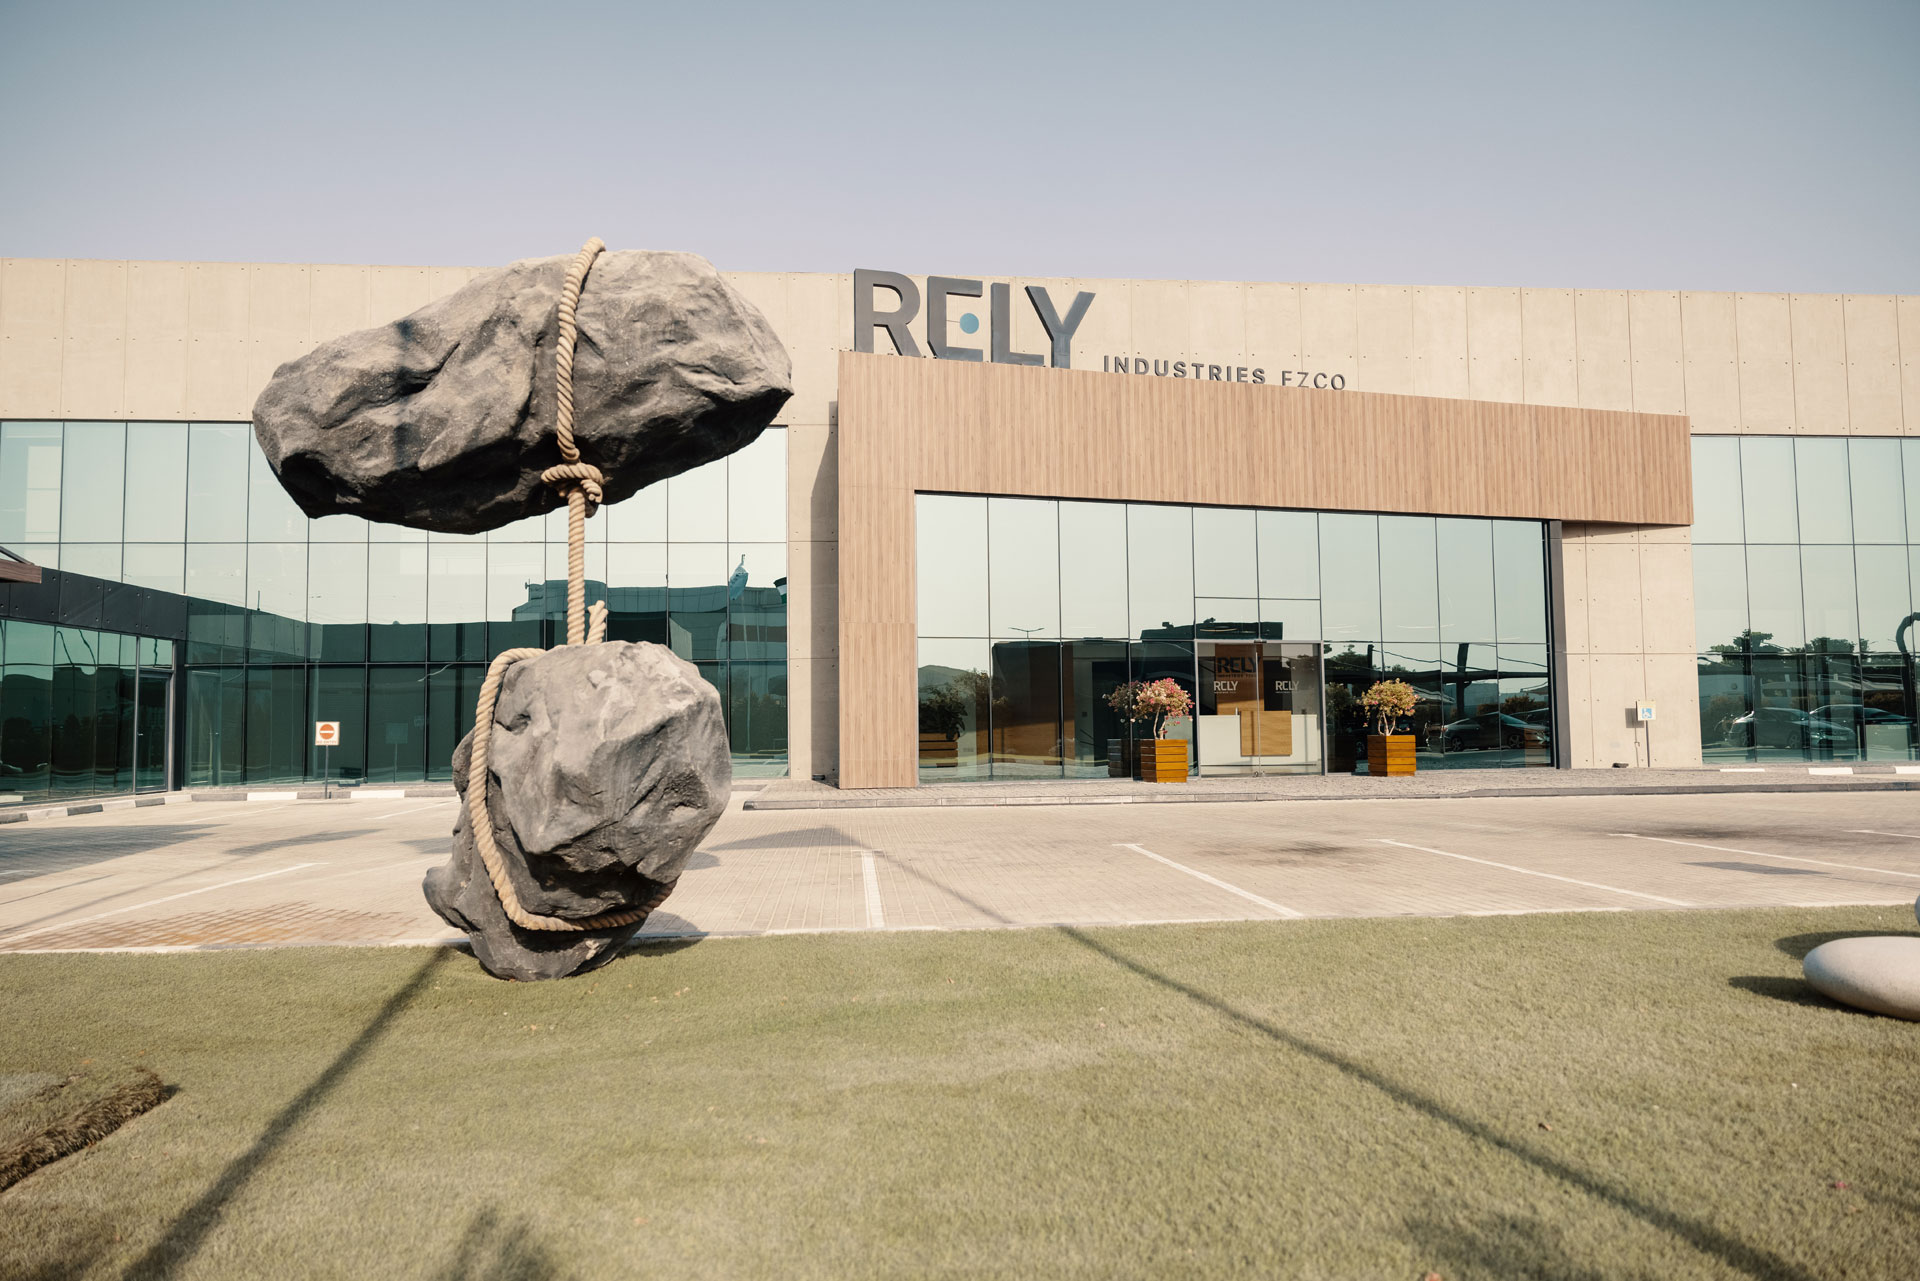 A rock sculpture in front of a building.